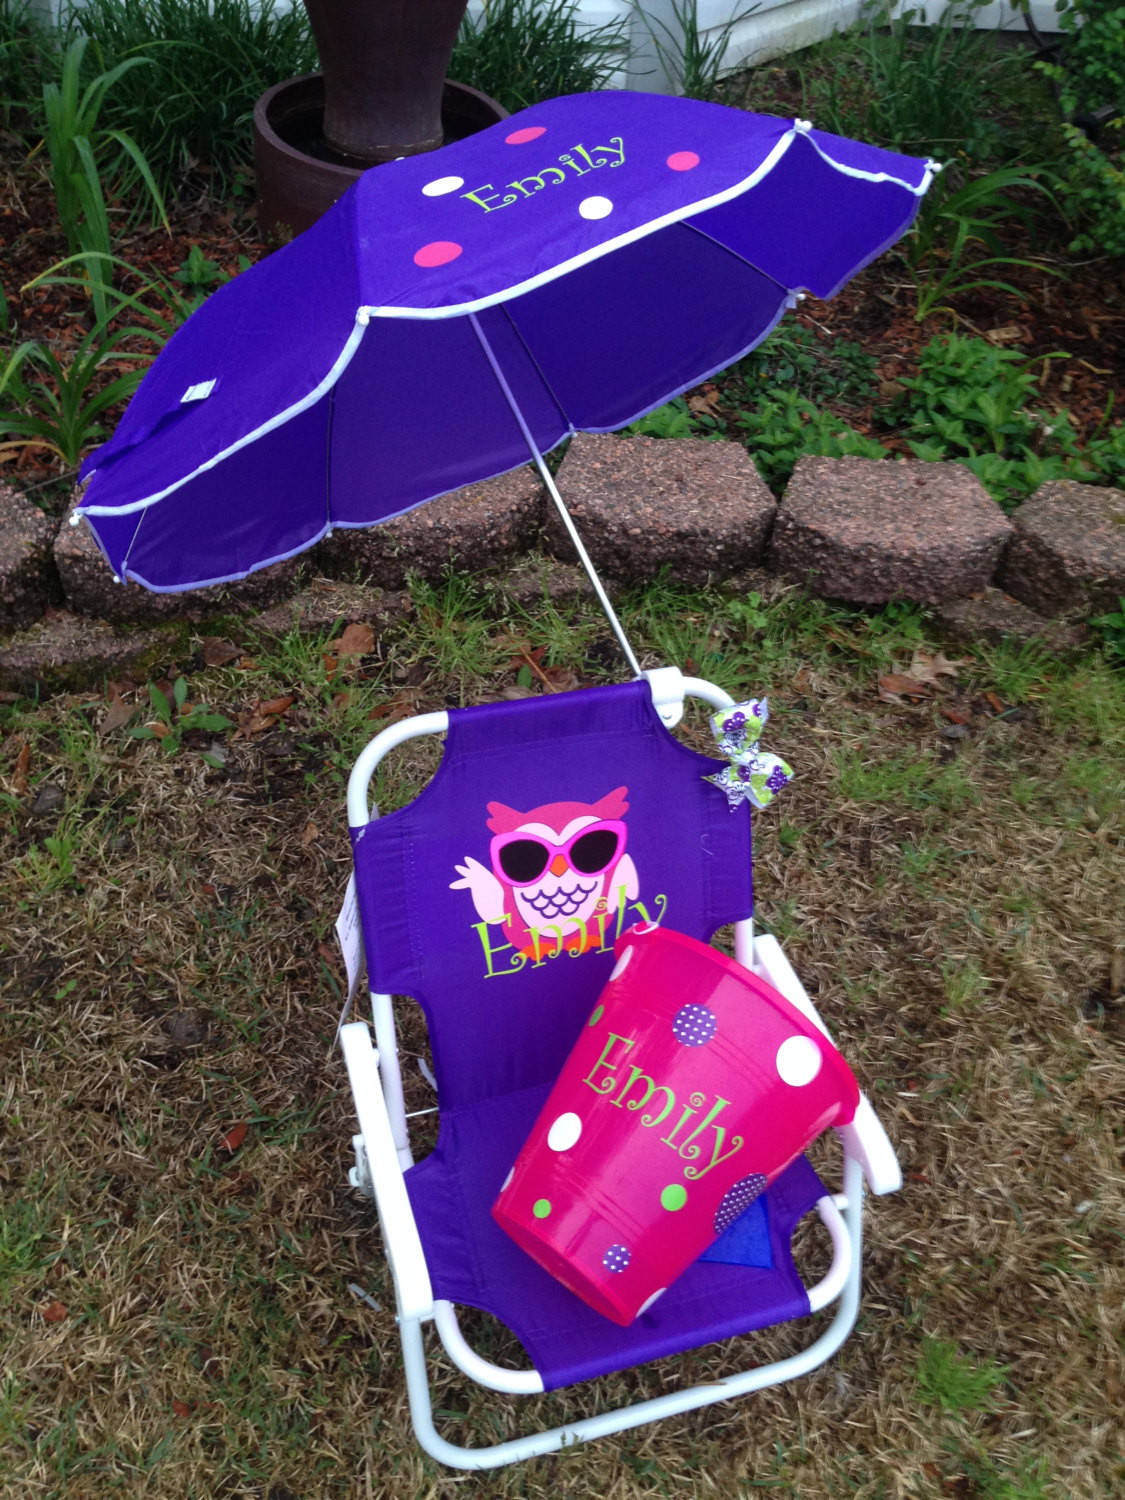 Beach Chair For Kids
 Persoanlized Kids Beach Chair with Umbrella by